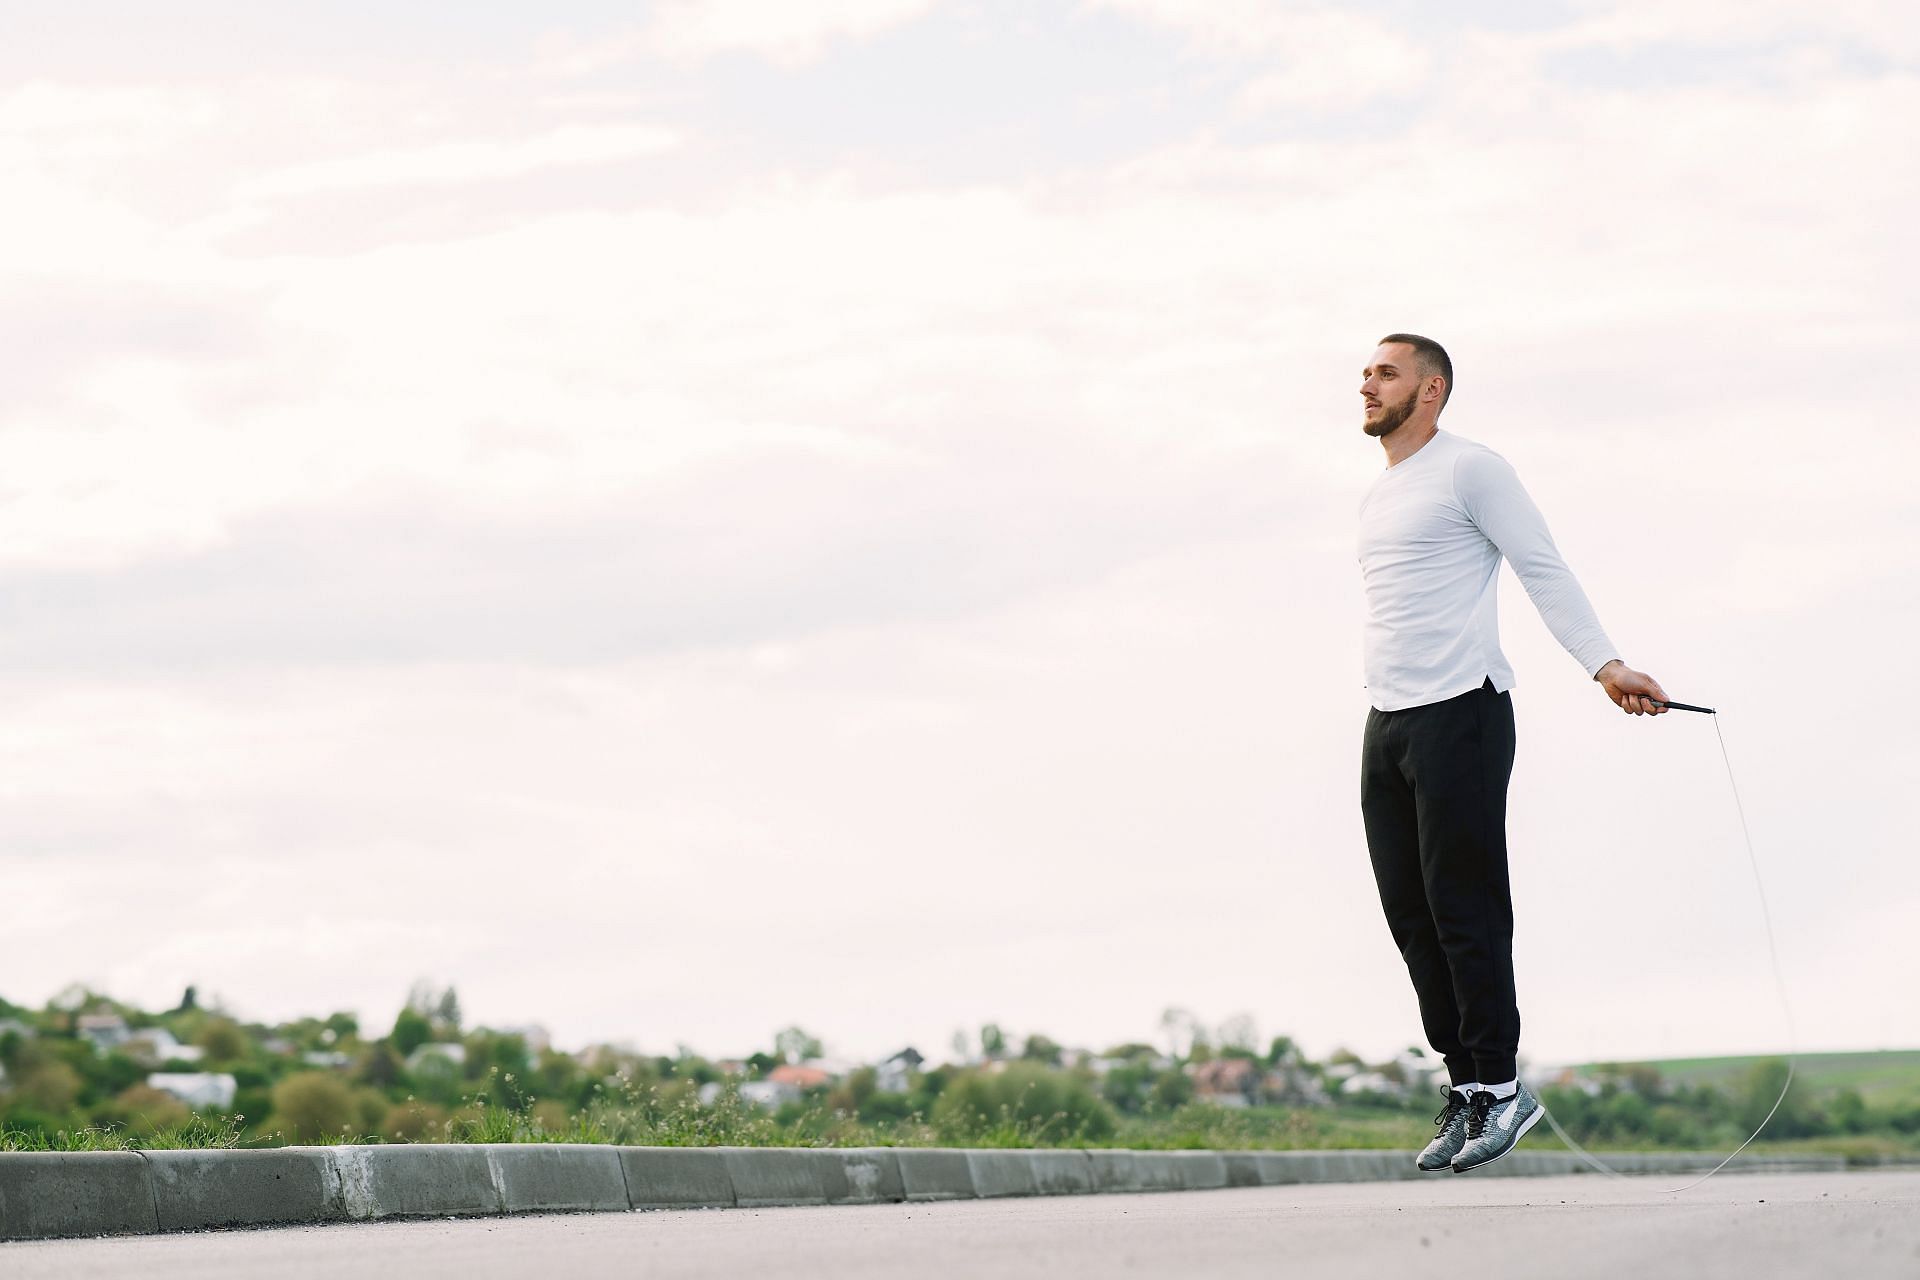 Range of motion (ROM) plays an important role in your workouts. (Image via Pexels / Gustavo Fring)